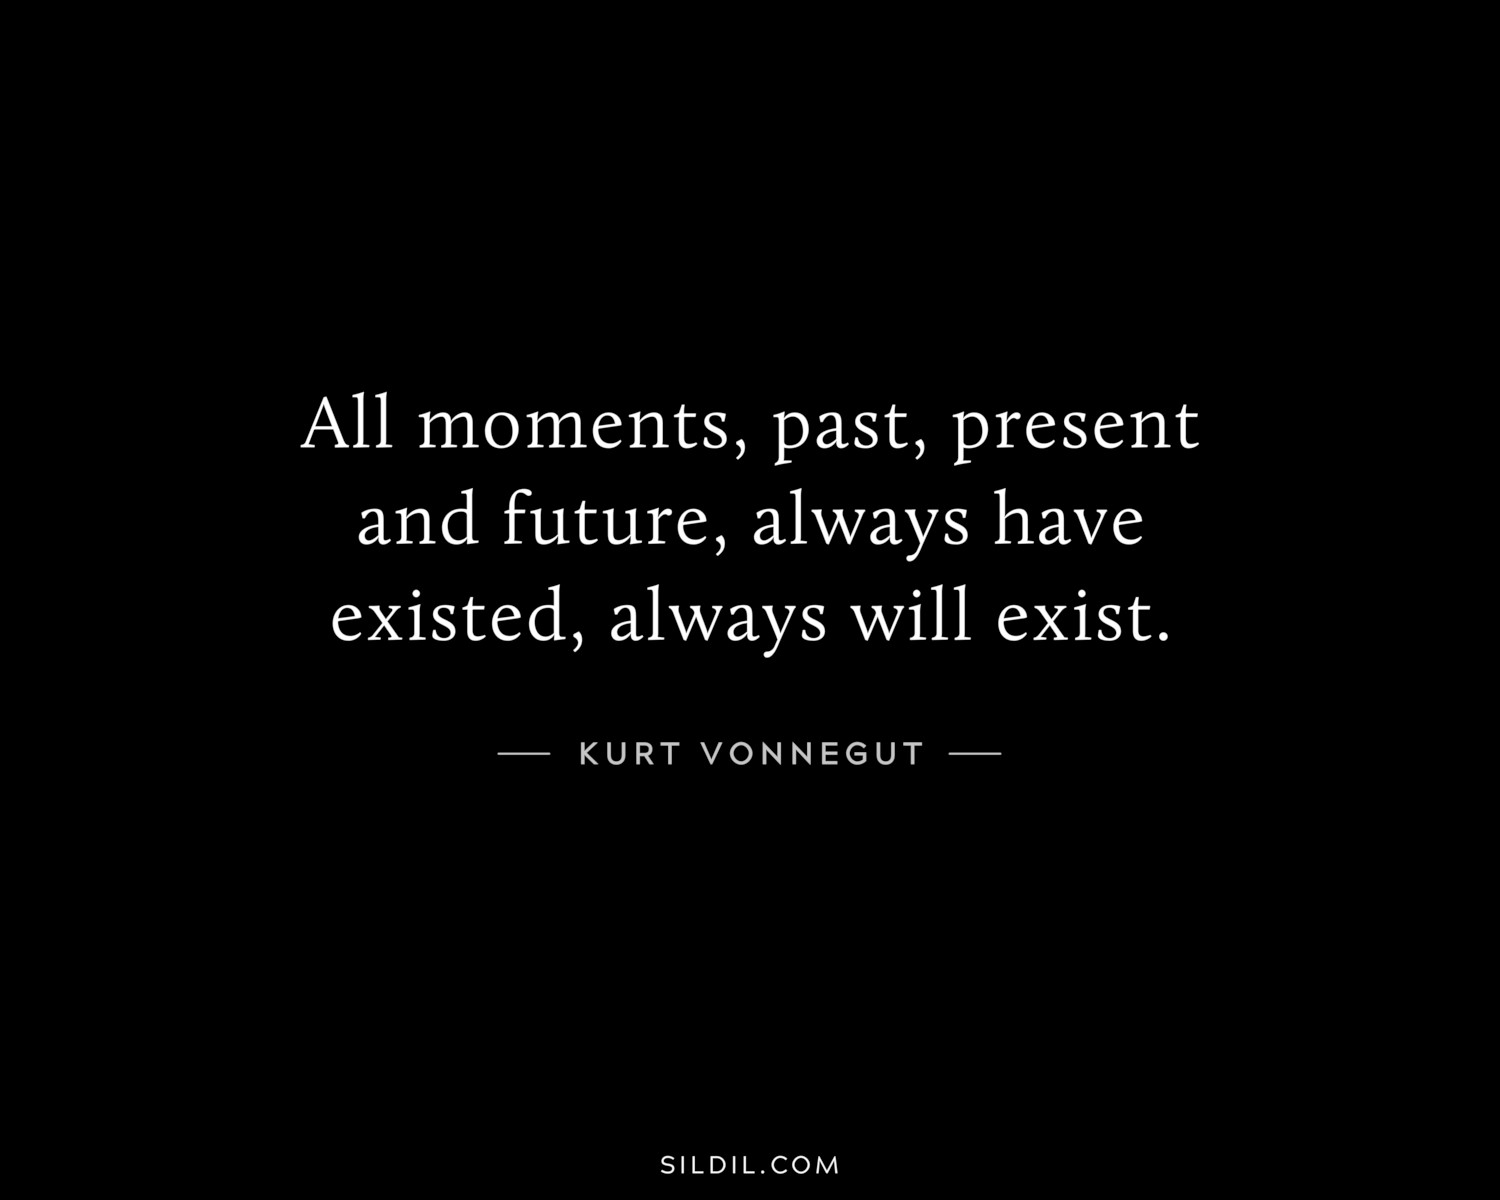 All moments, past, present and future, always have existed, always will exist.